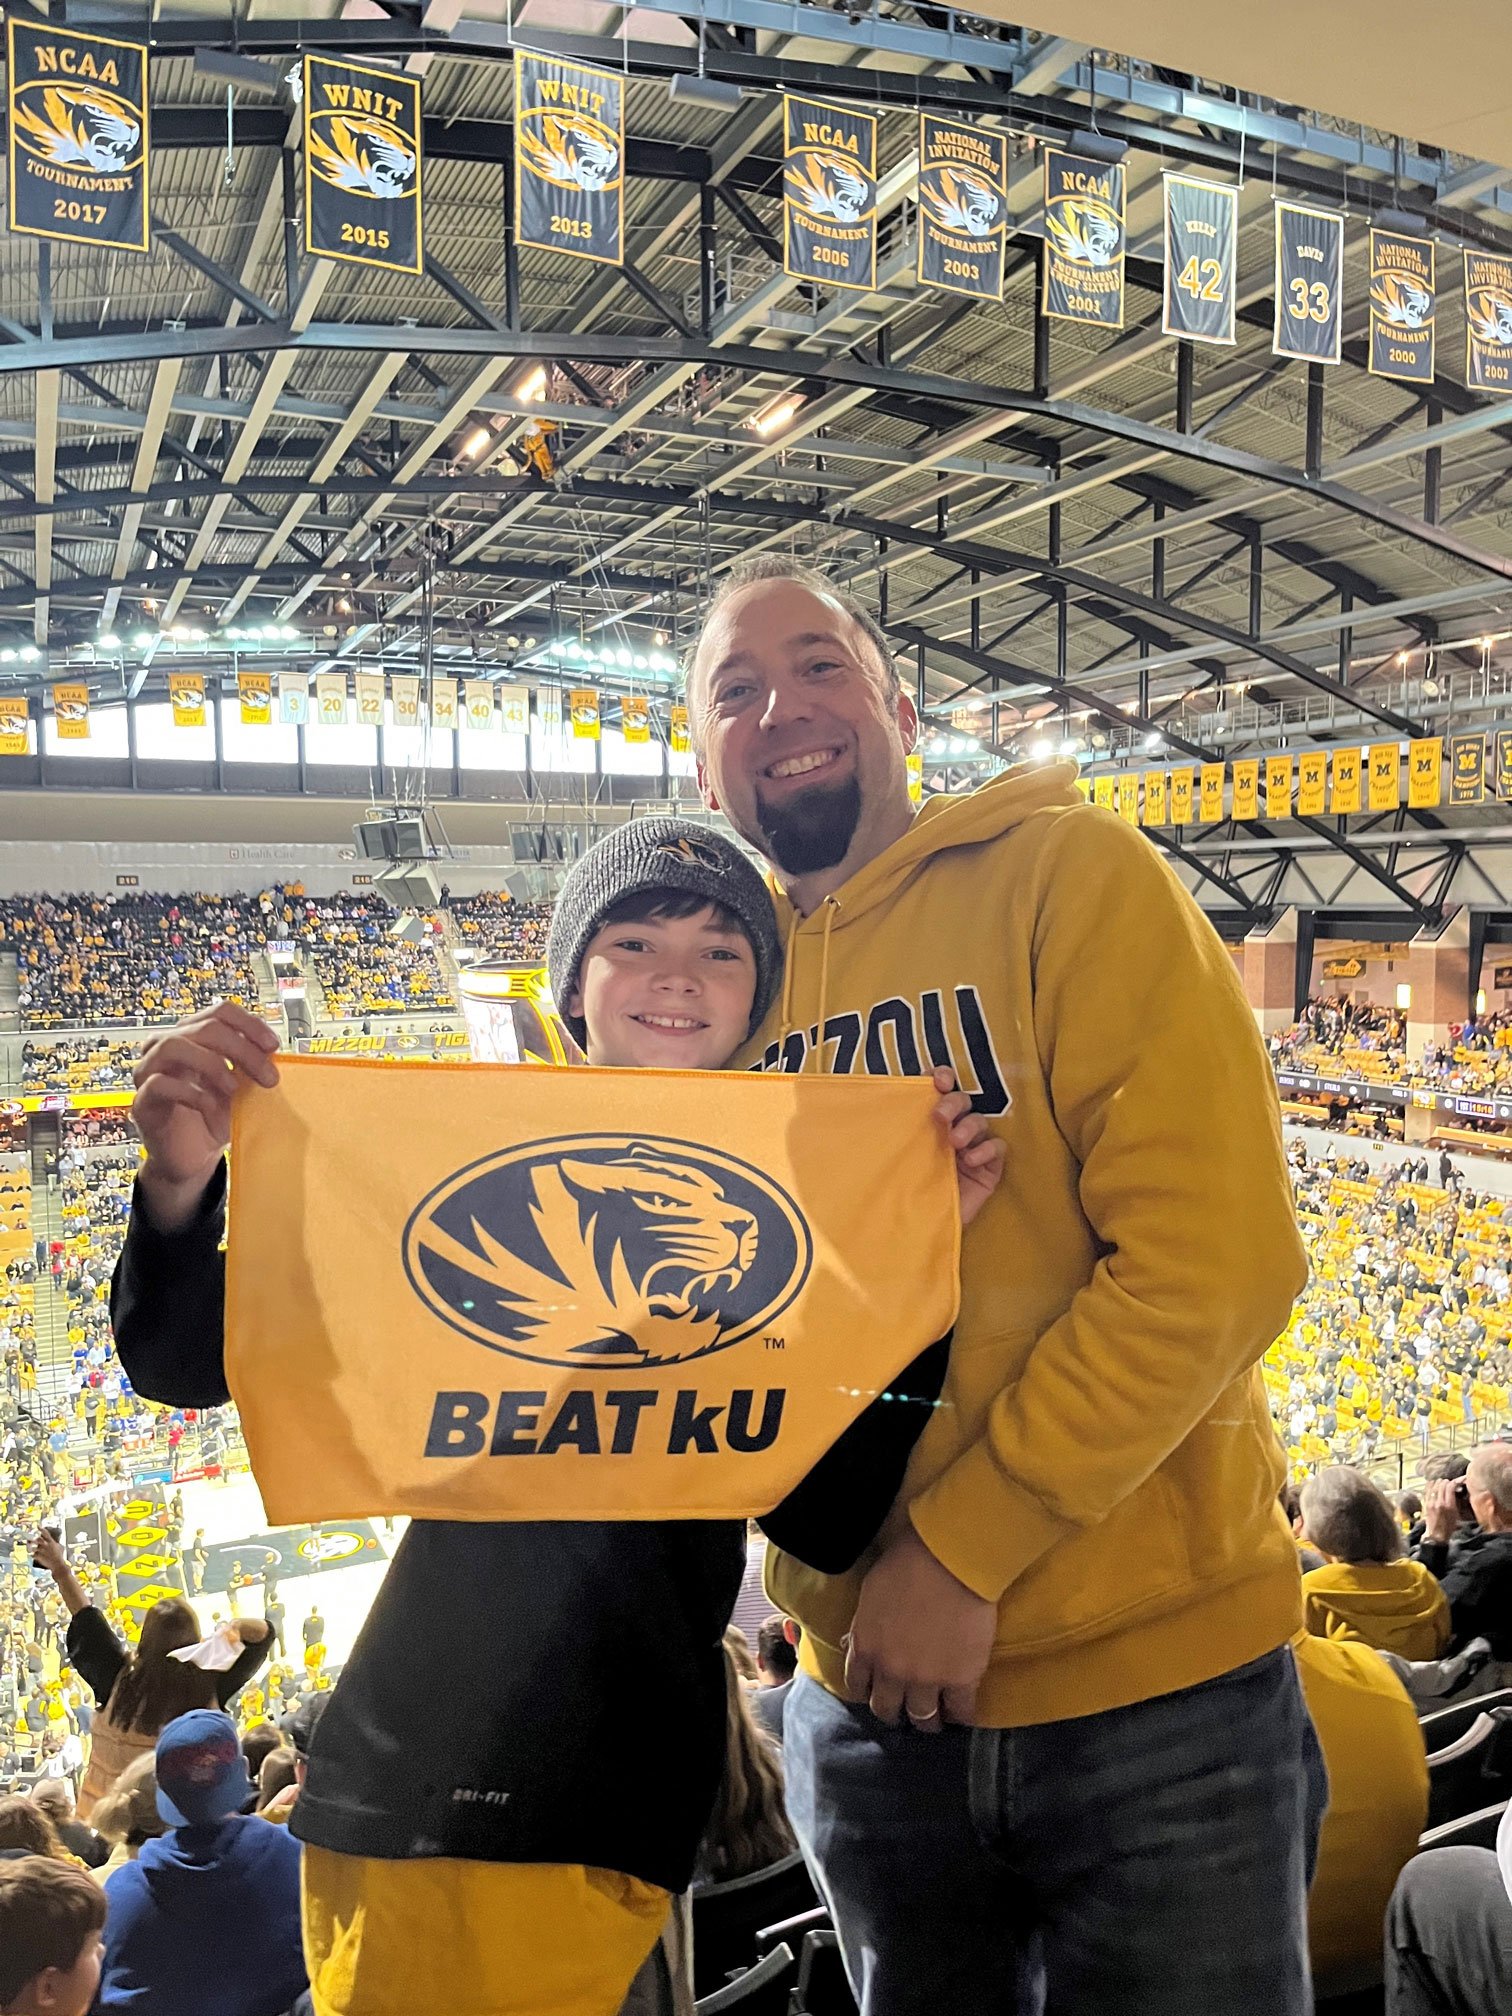 CO Scheffer and his son at a MIzzou game